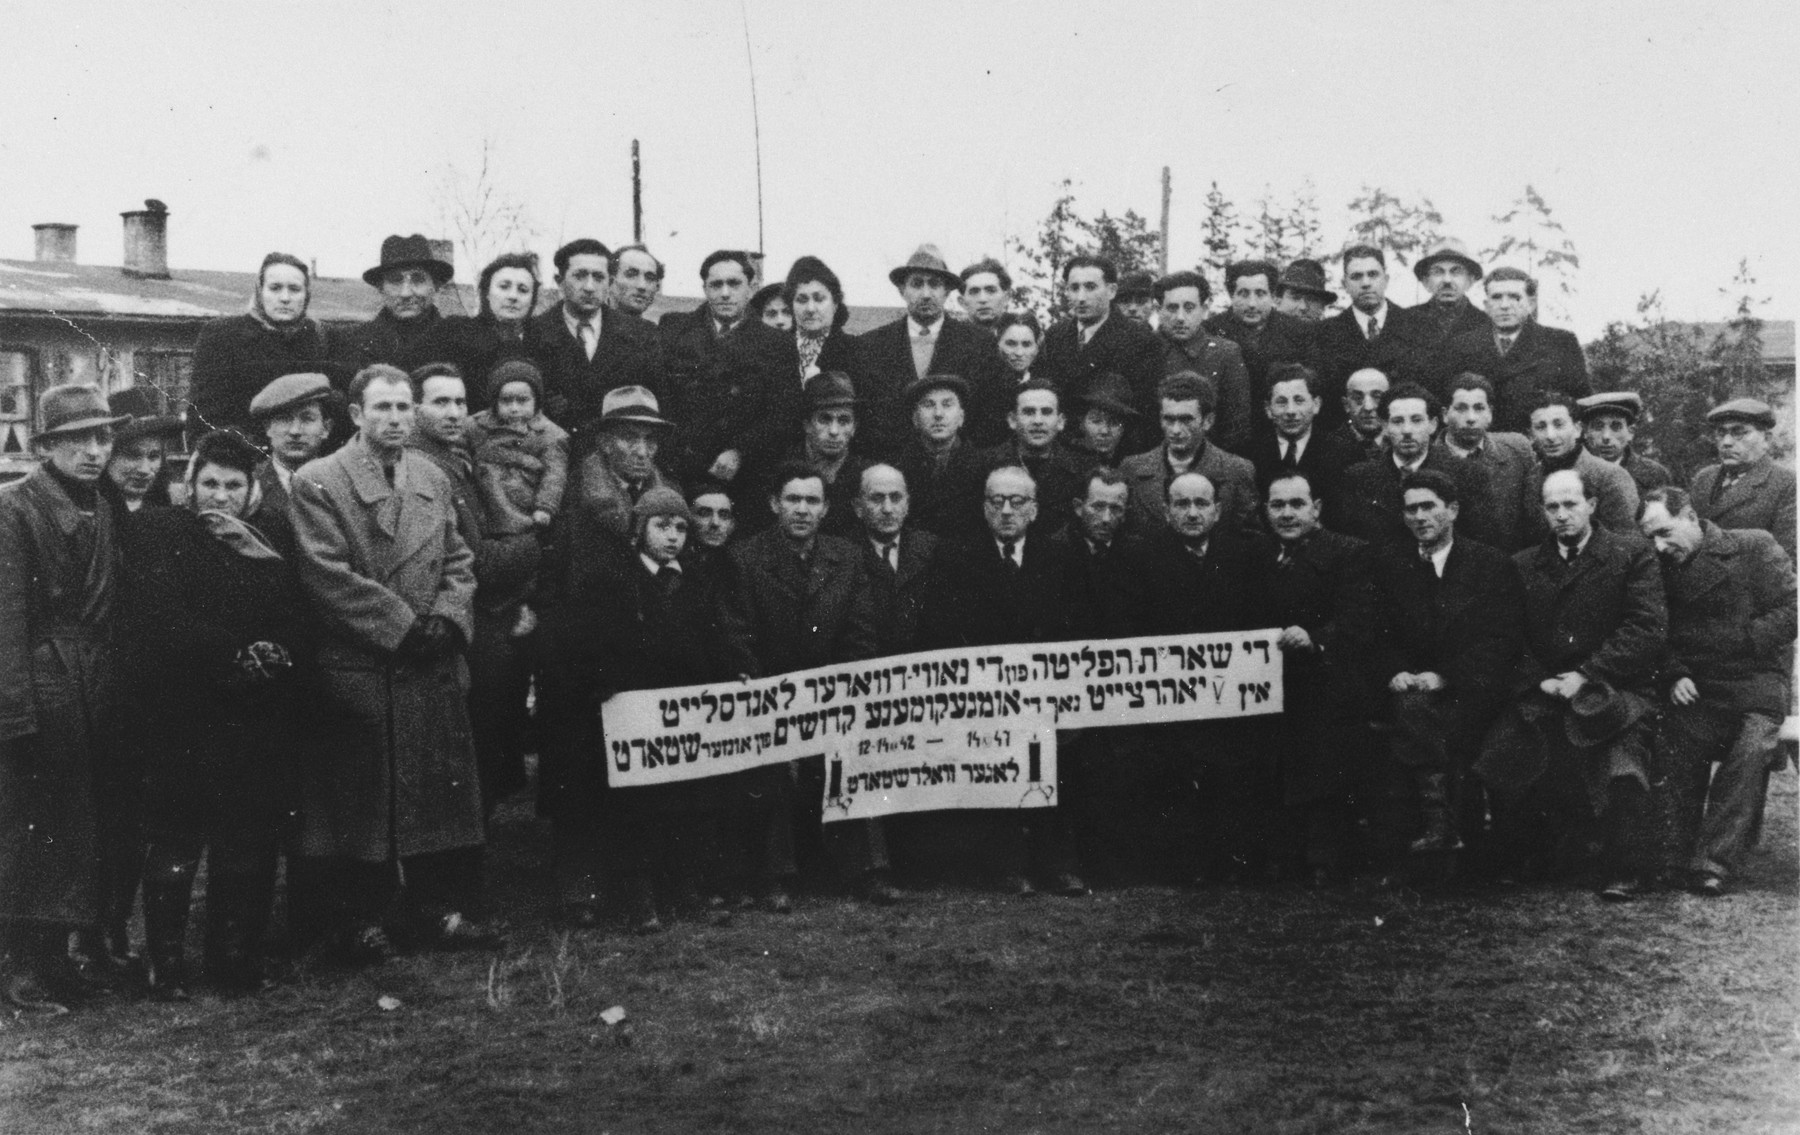 Group portrait of survivors at a commemoration of the destruction of the Jewish community of Nowy Dwor by the Nazis.  The commemoration took place at the Pocking displaced persons camp.

Pictured in the first row, fifth from the right is Iser Knecht.